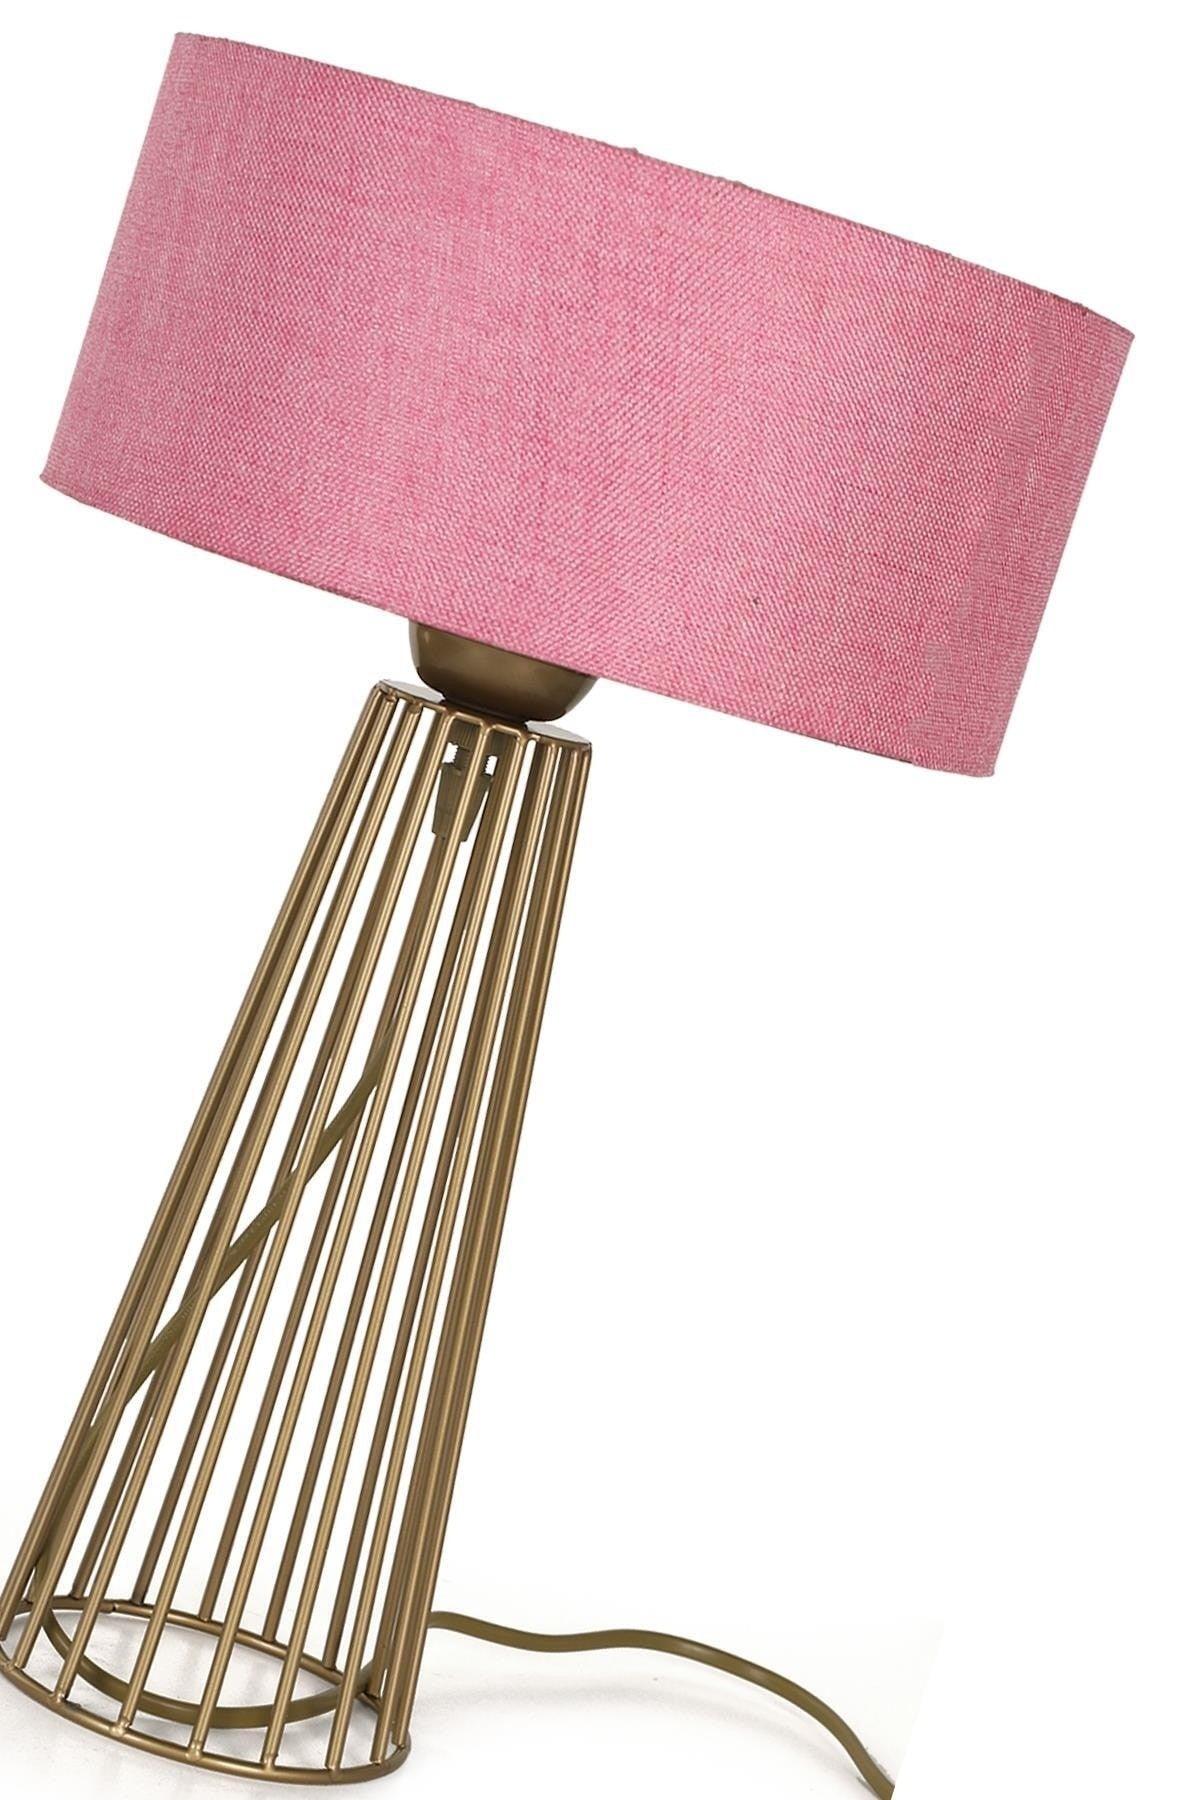 Philippine Table Lamp Tumbled Pink Hat - Swordslife